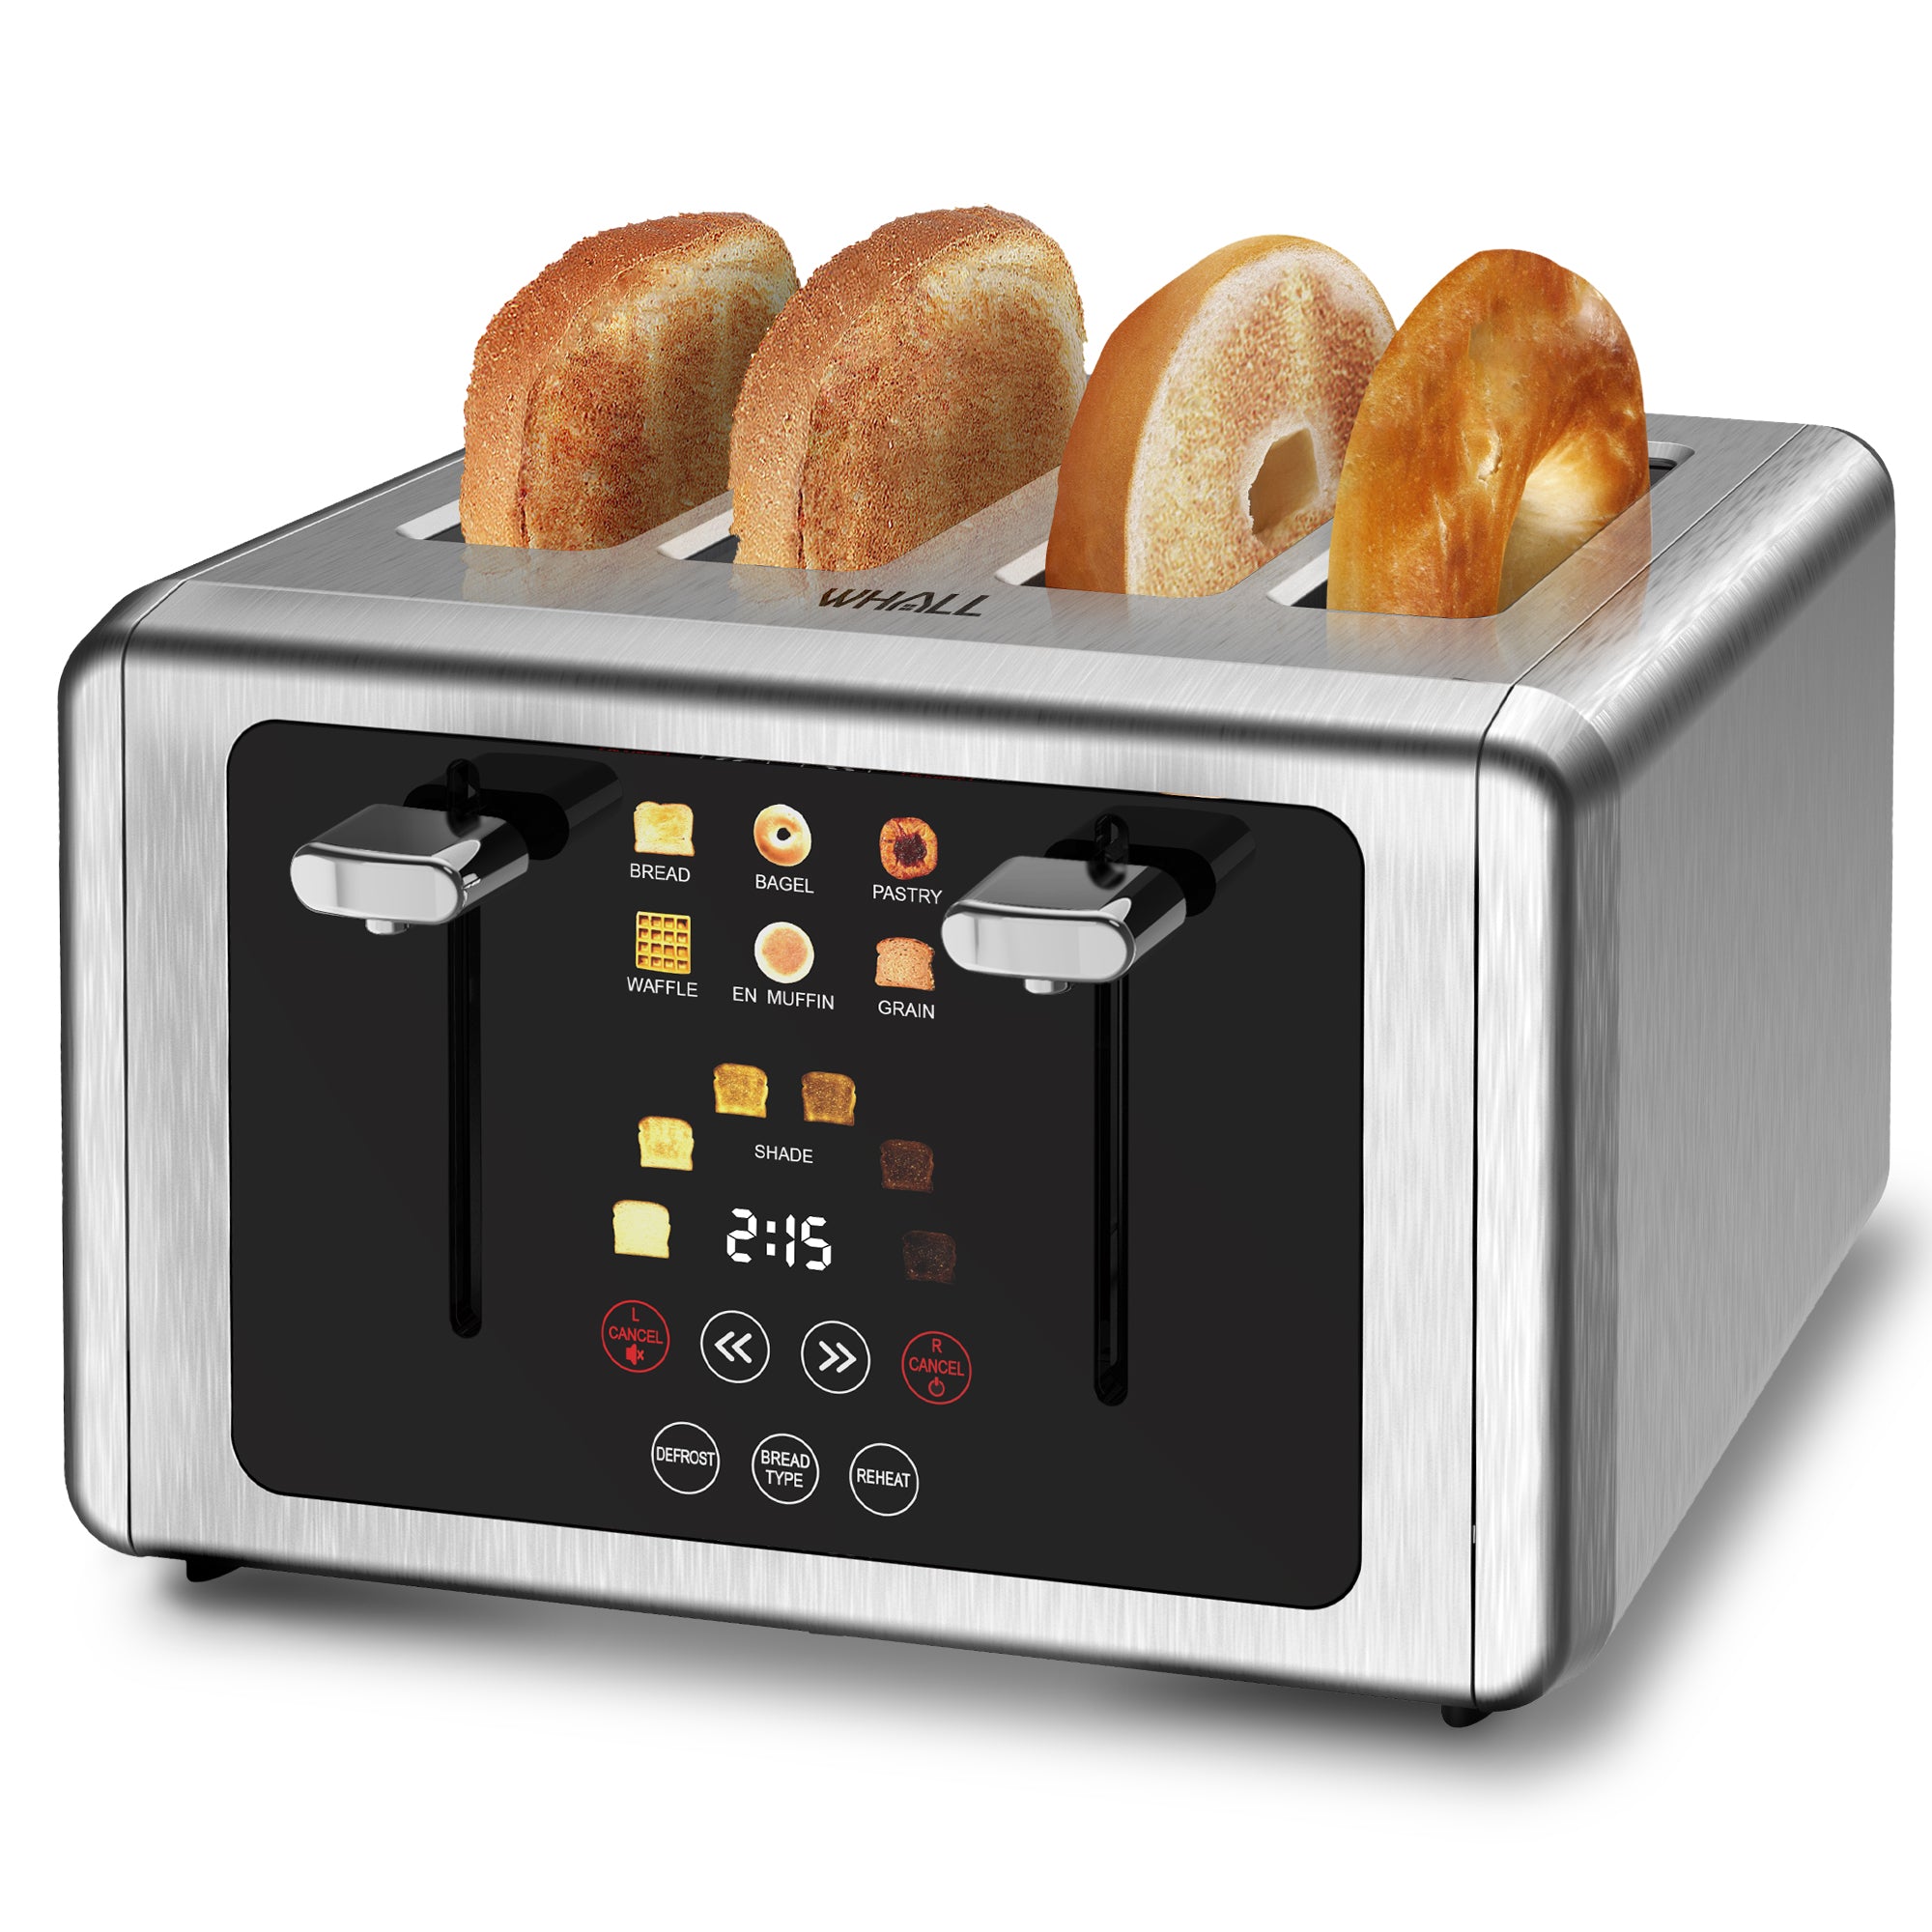 WHALL® Touch Screen Toaster 4 Slice | Stainless Steel, Digital Timer, Sound | 6 Bread Types & Shades